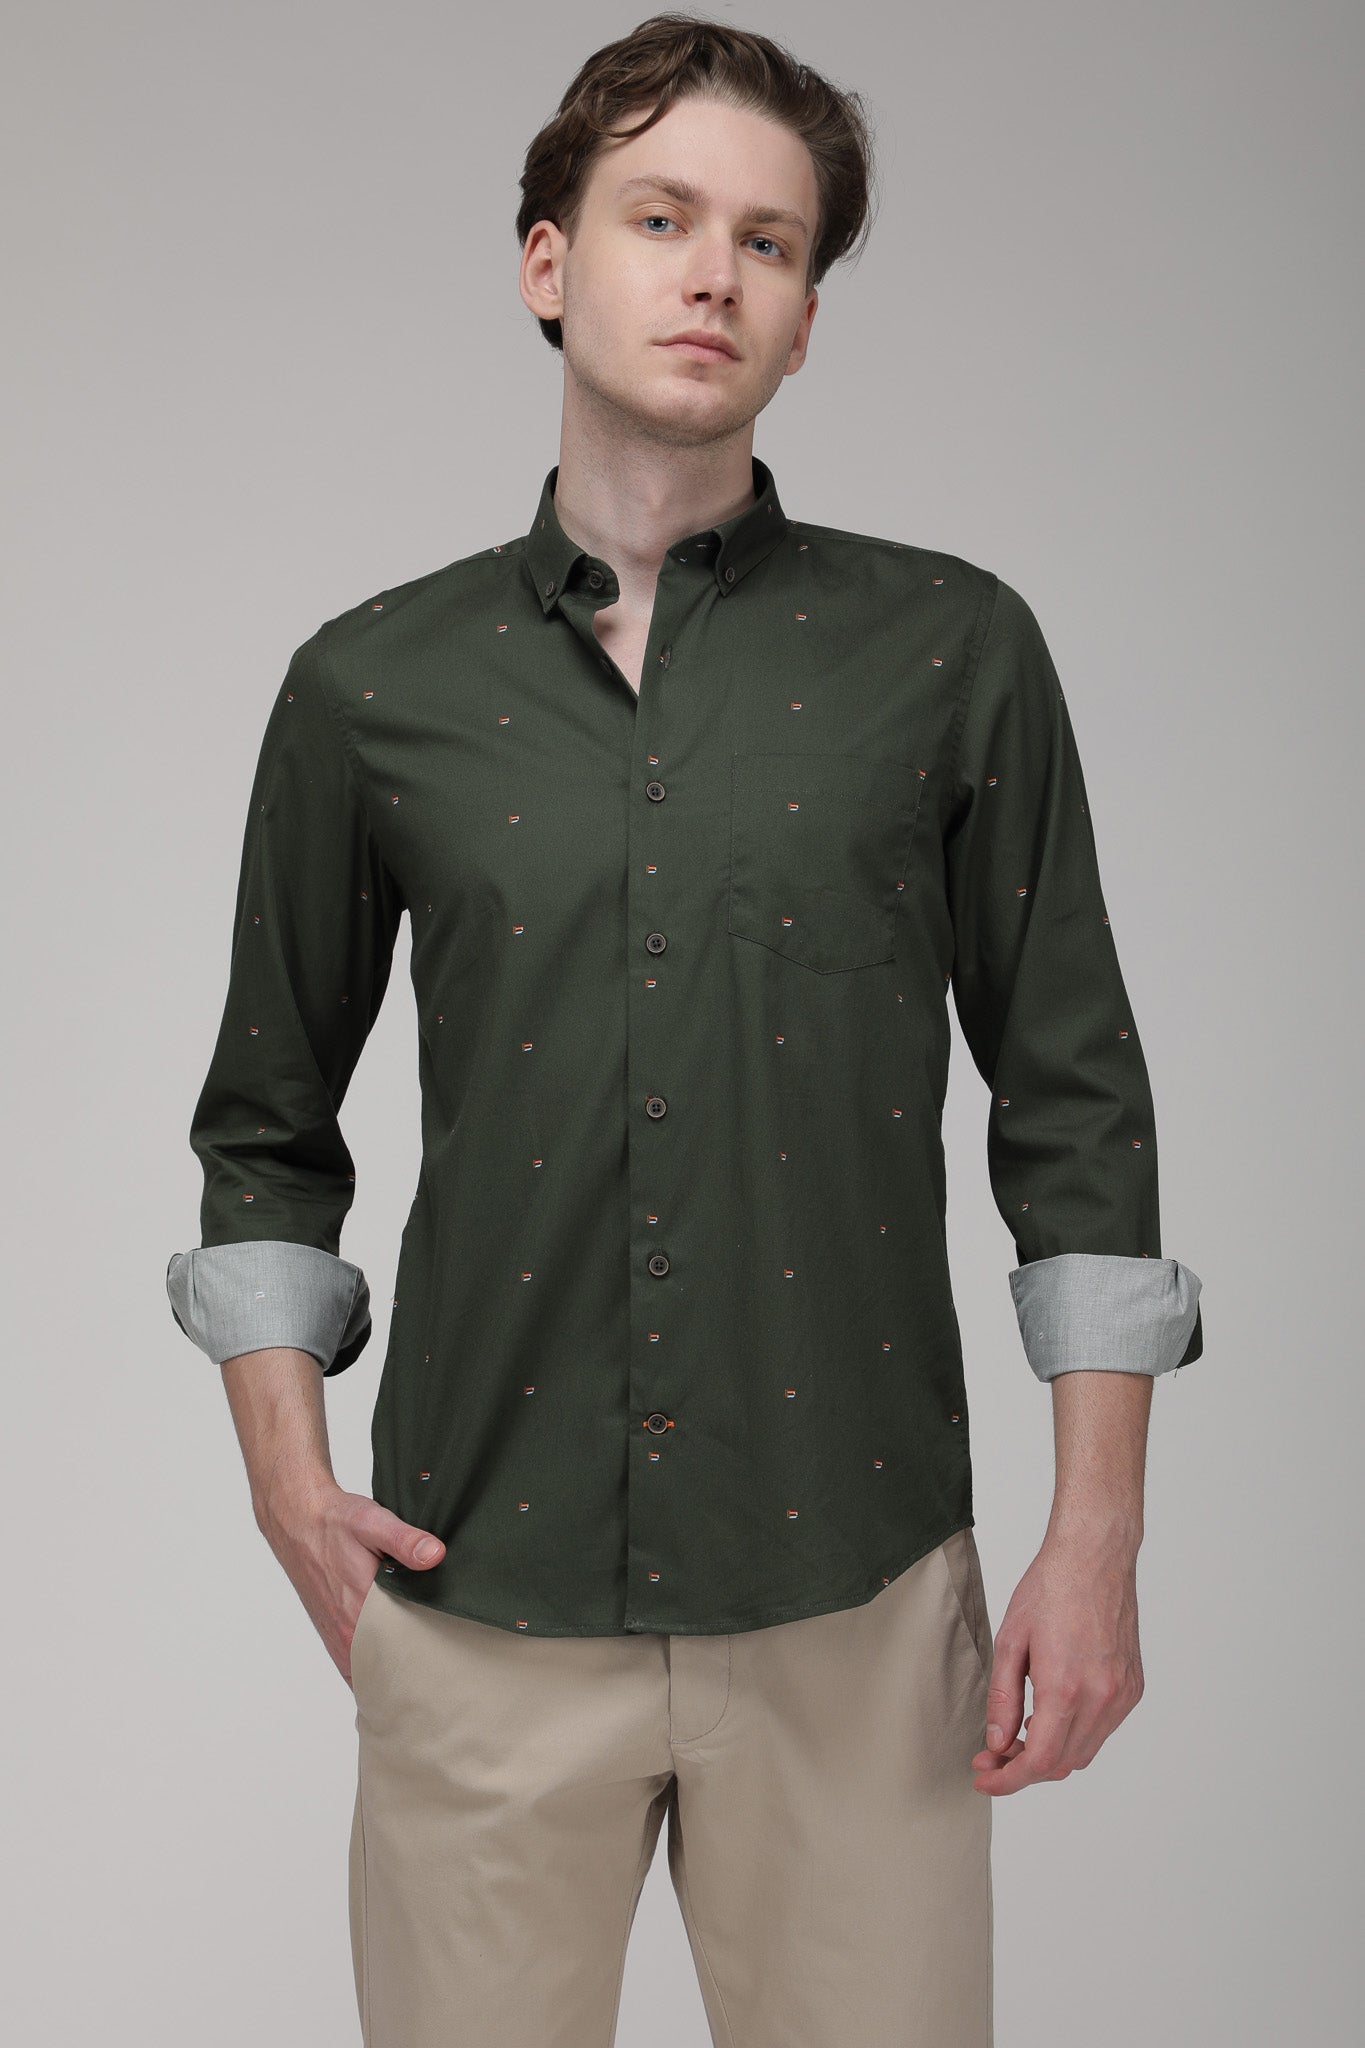 Bare Brown Printed Cotton Slim Fit Shirt with Full Sleeves - Olive Green